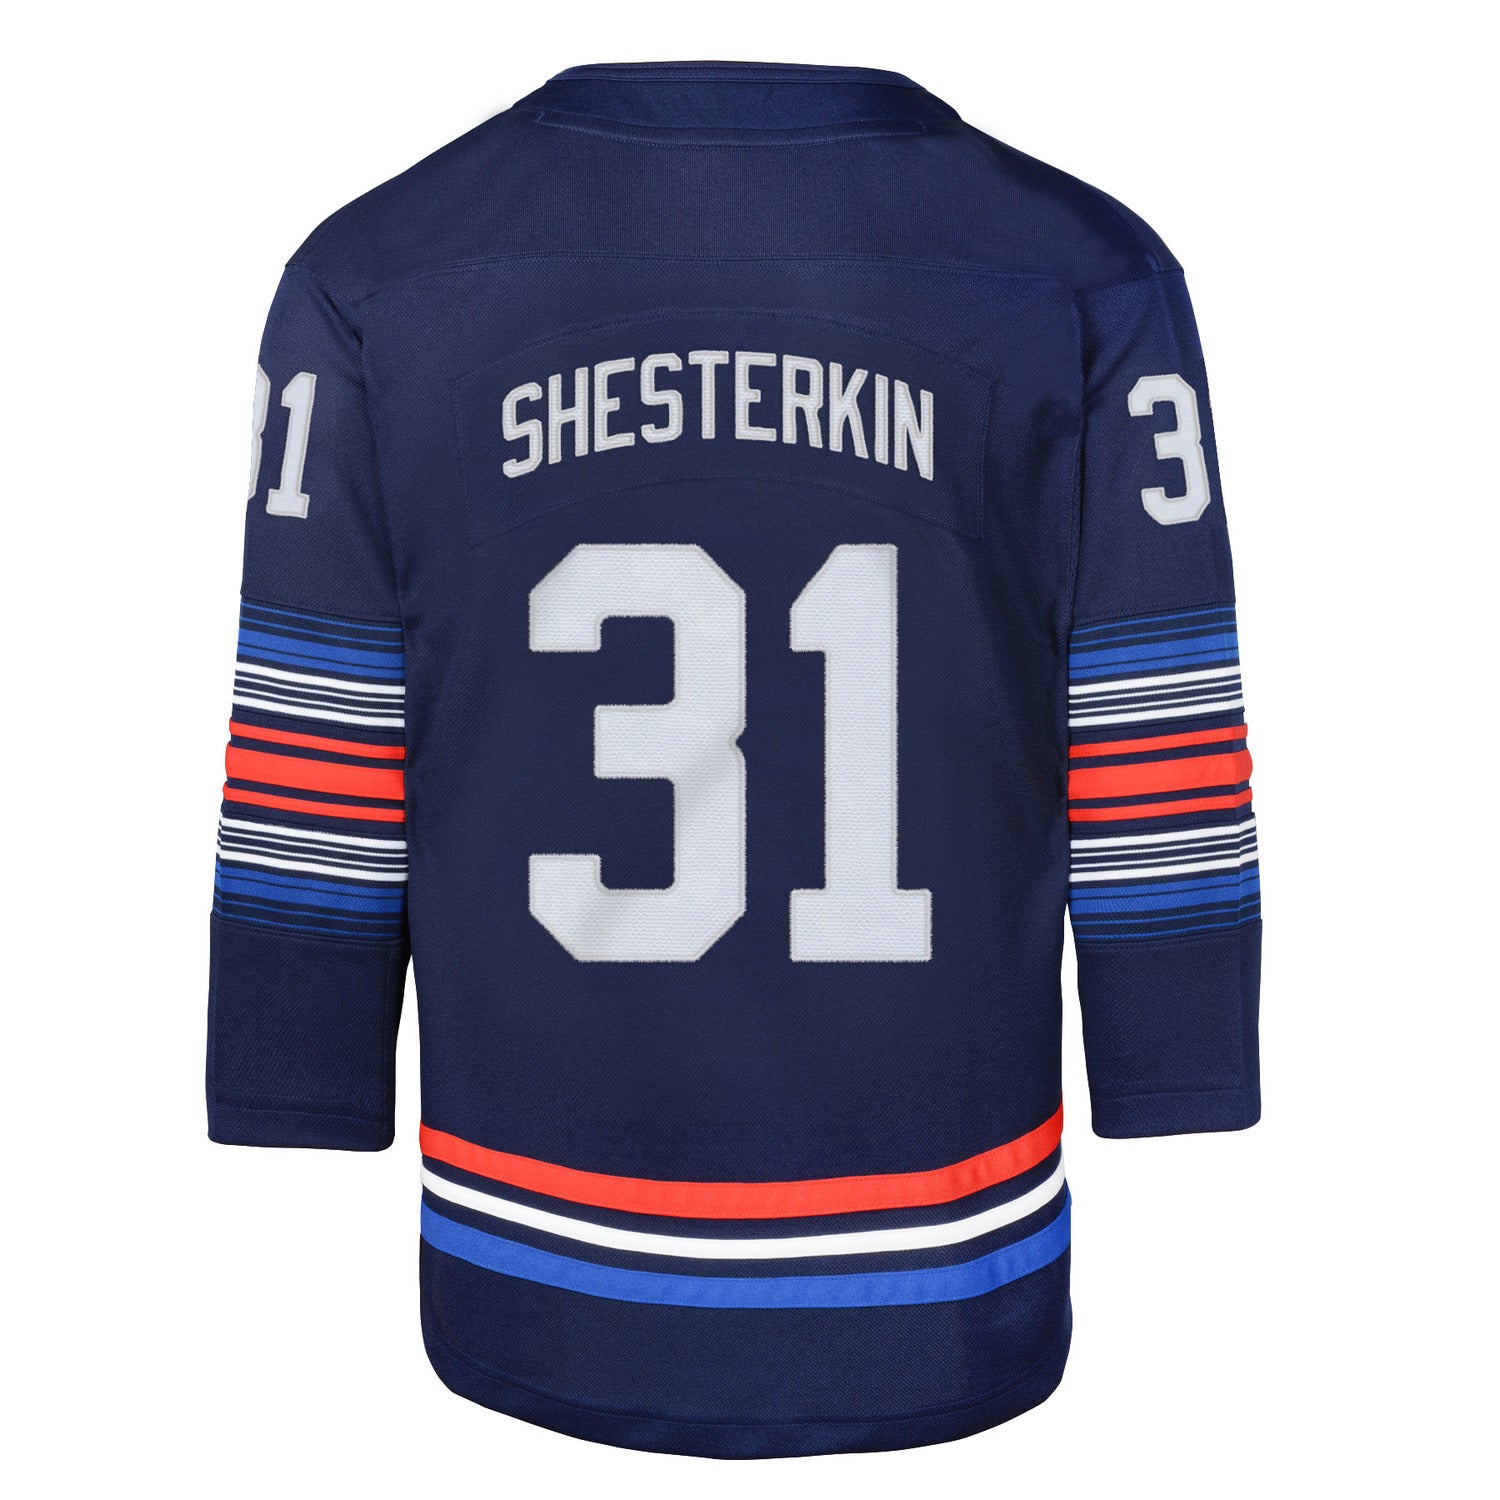 Youth Igor Shesterkin Premier Third Jersey - Back View